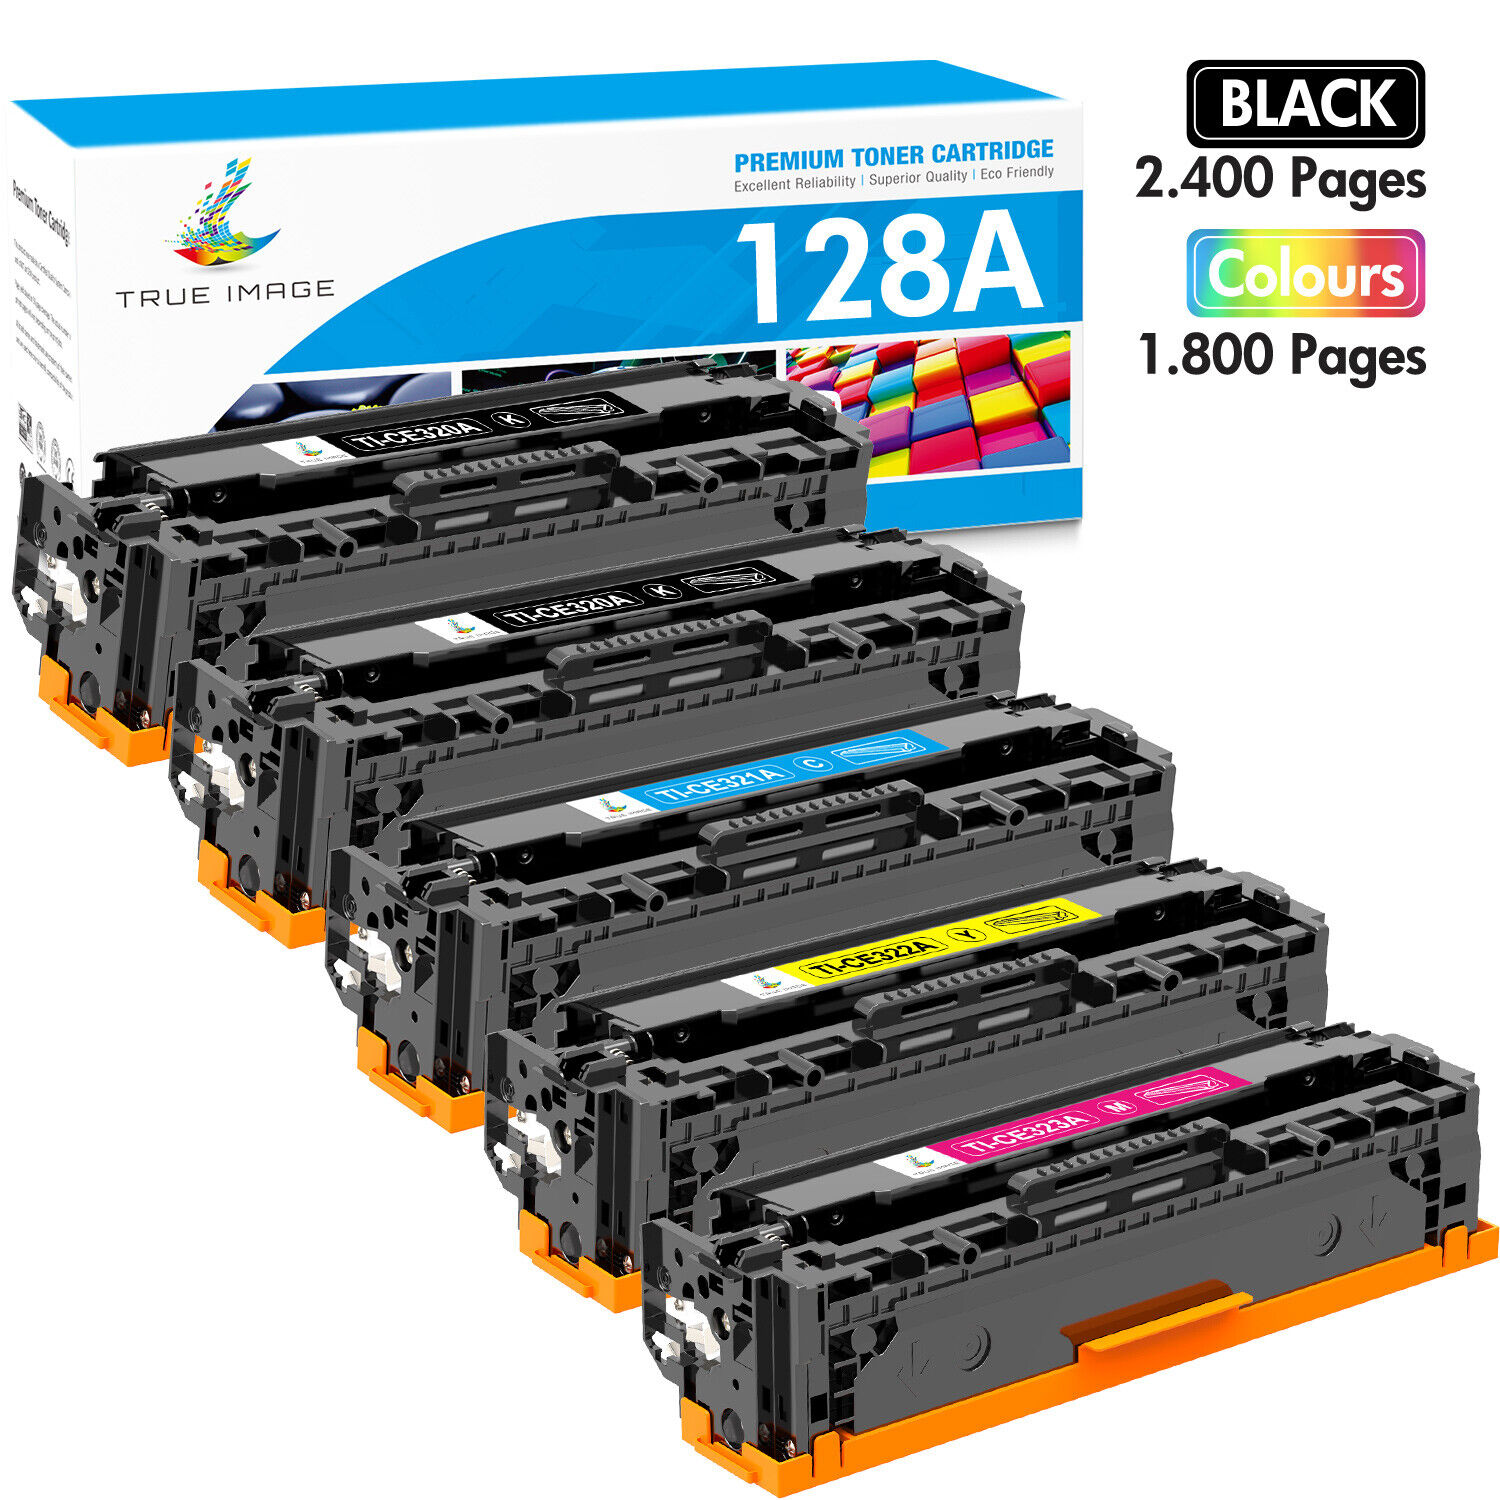 5 Pack Color CE320A Toner Cartridge For HP 128A LaserJet Pro CP1525nw CM1415fnw